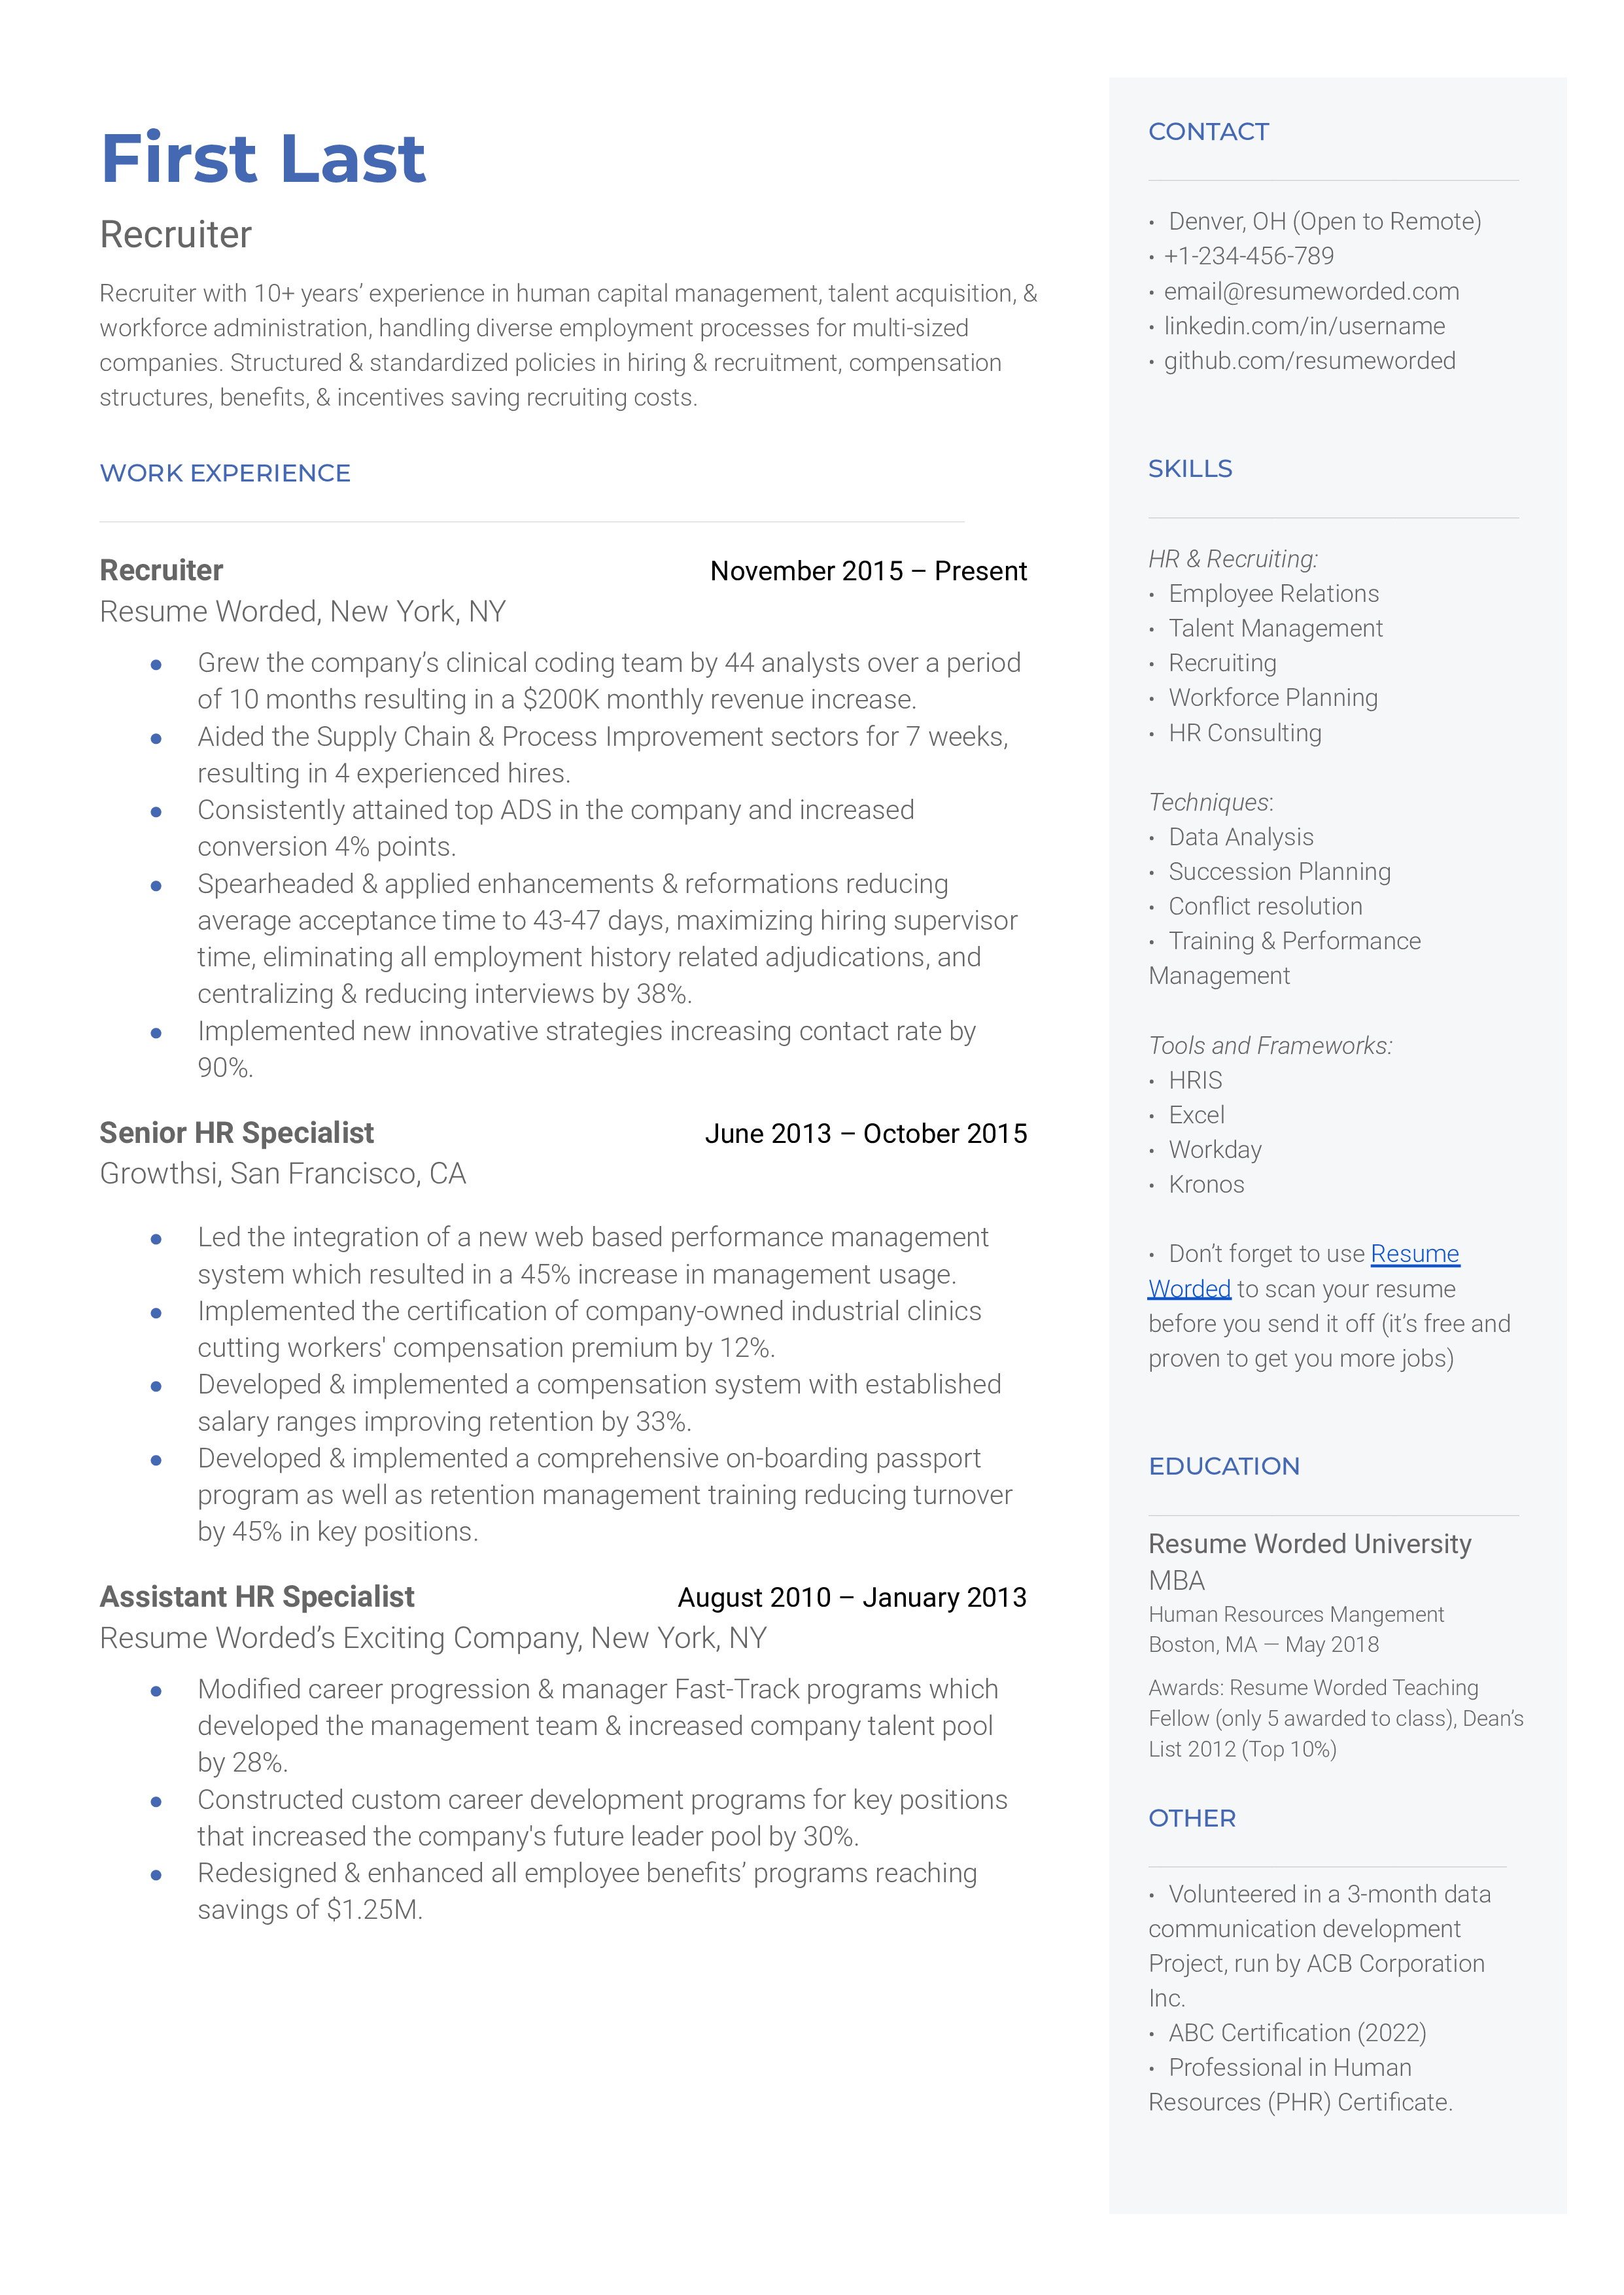 A clean, crisp CV showcasing recruitment software skills and experience in remote hiring.